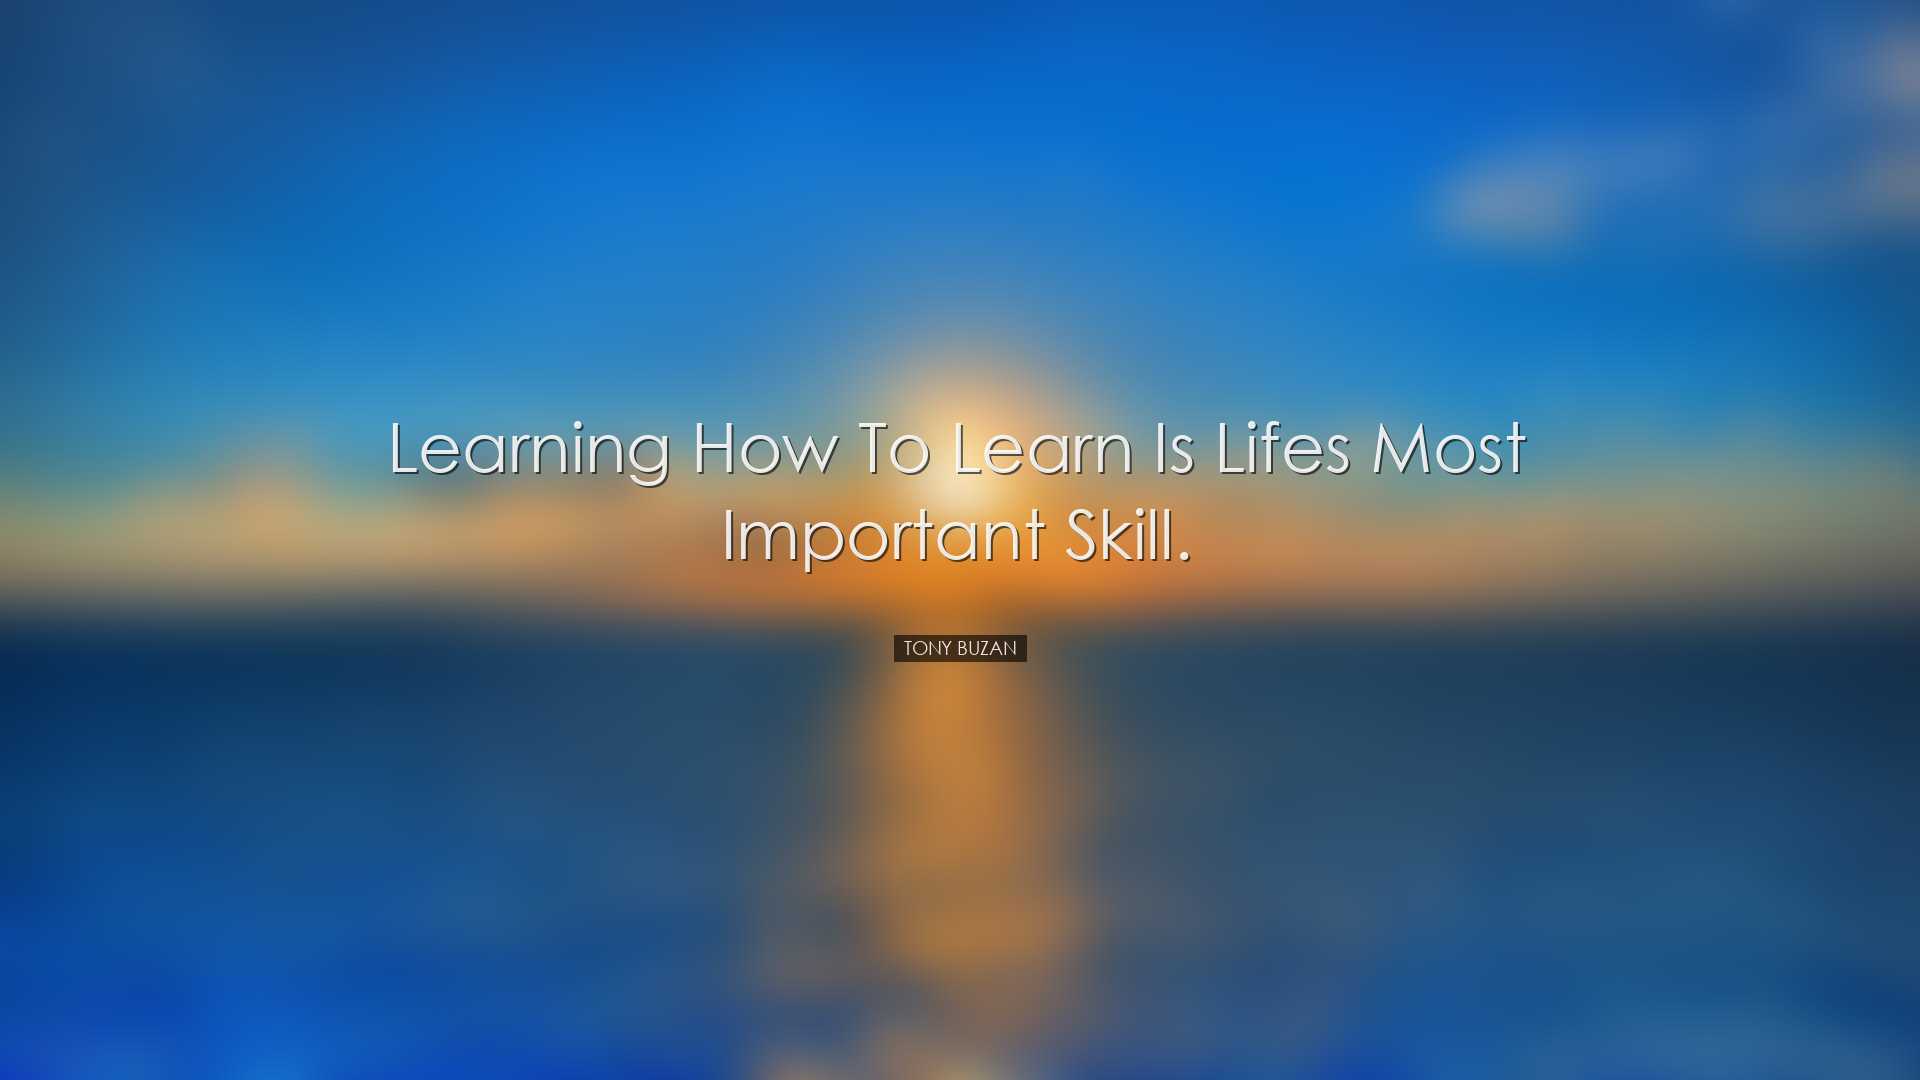 Learning how to learn is lifes most important skill. - Tony Buzan